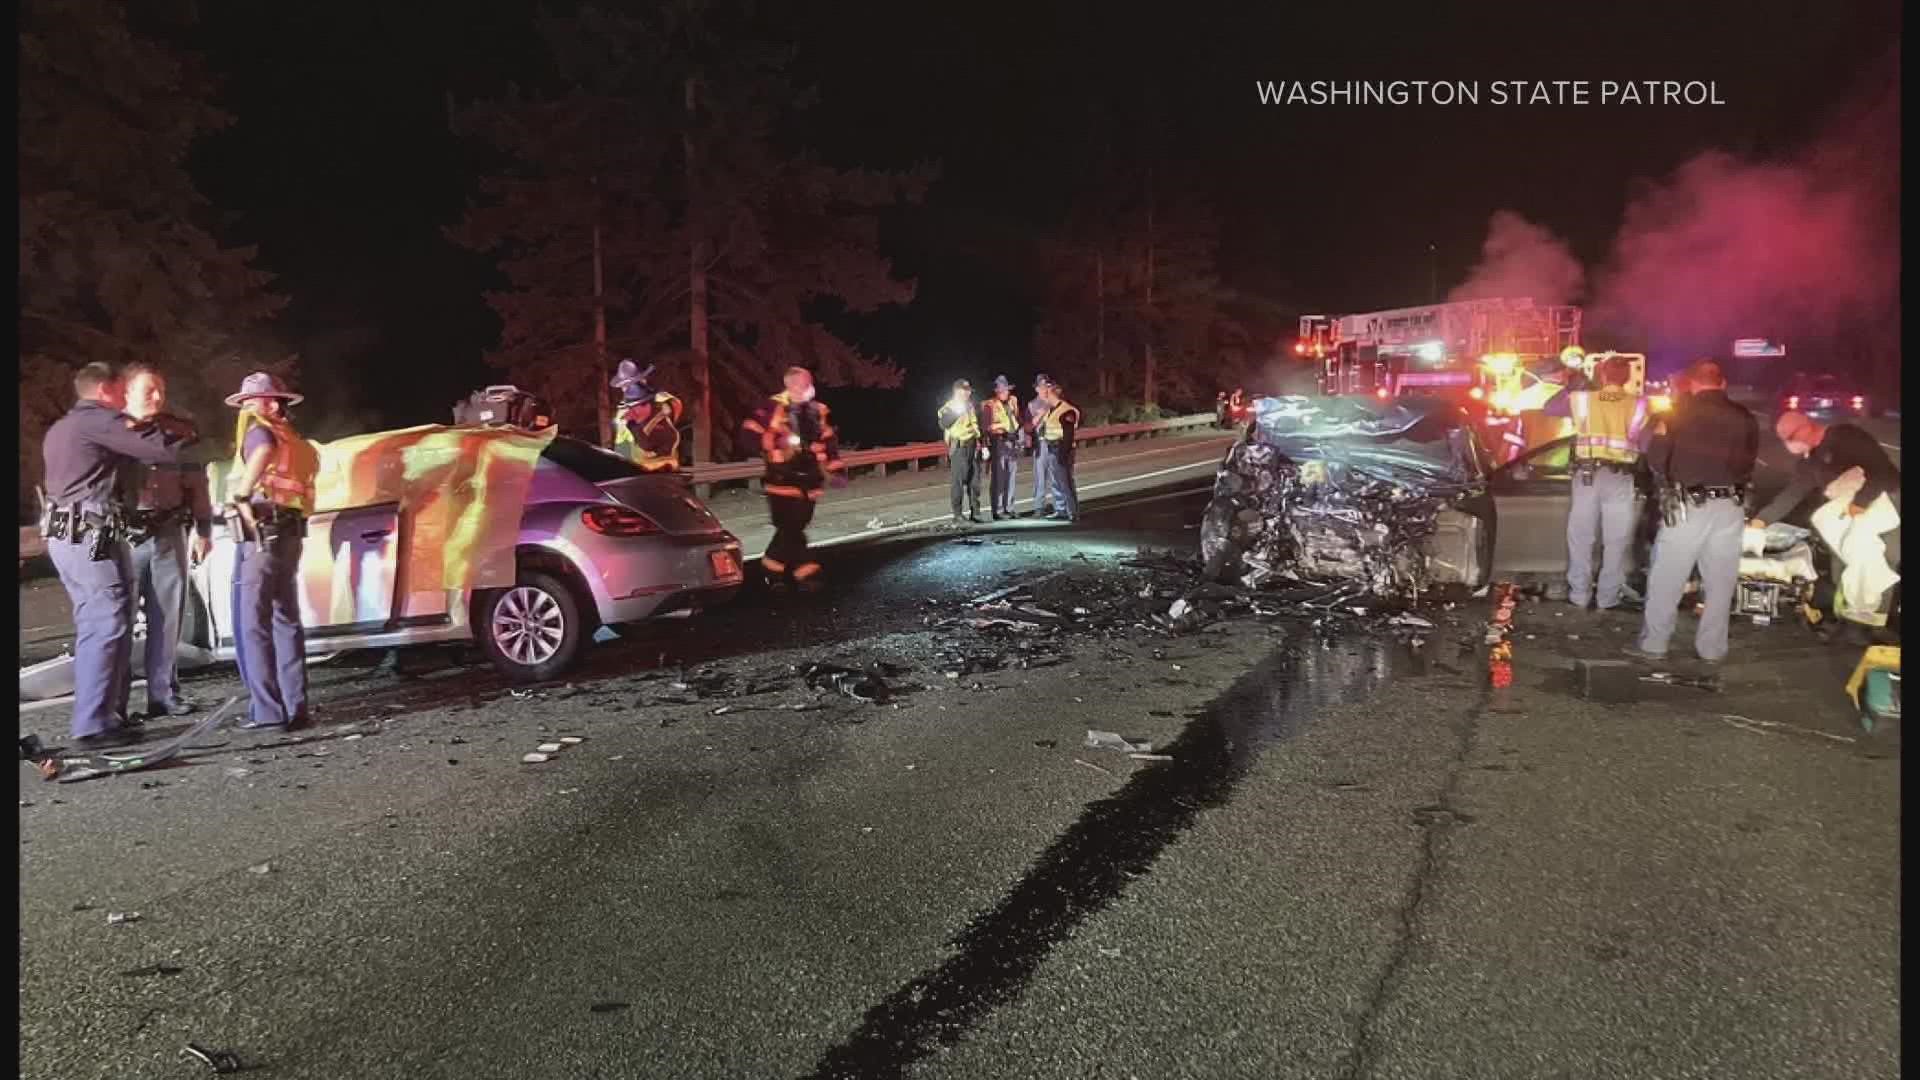 Two people were killed overnight after a vehicle crossed the center line on I-5 in Everett and crashed into another vehicle head-on.